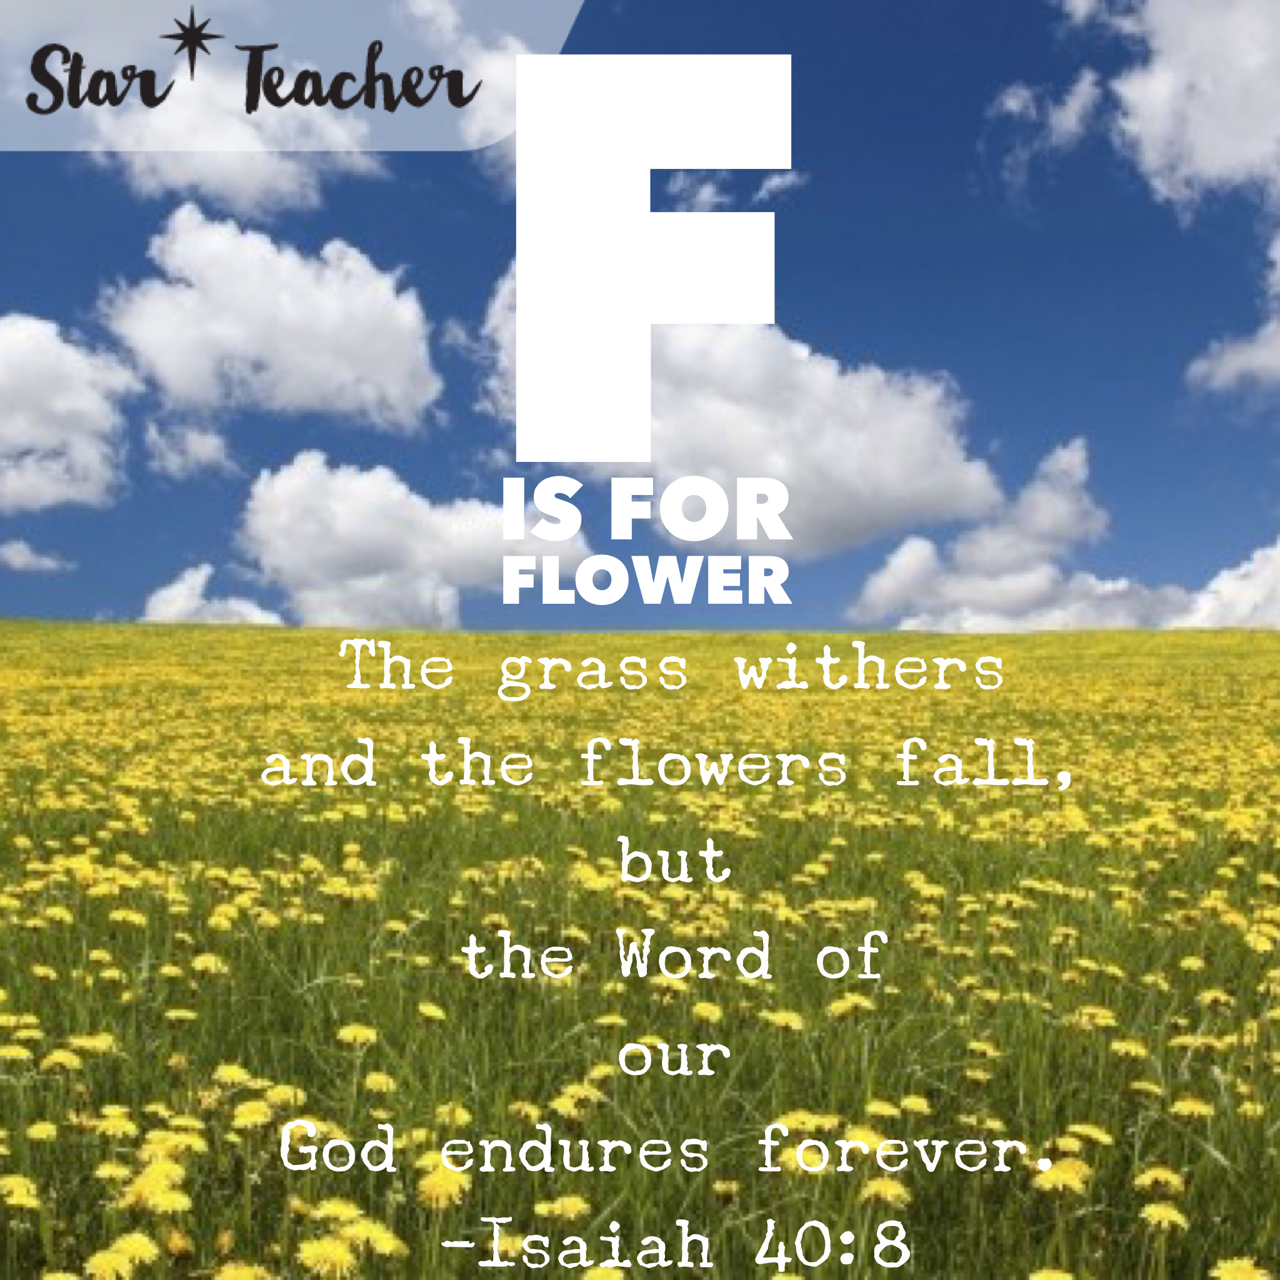 F is for Flower